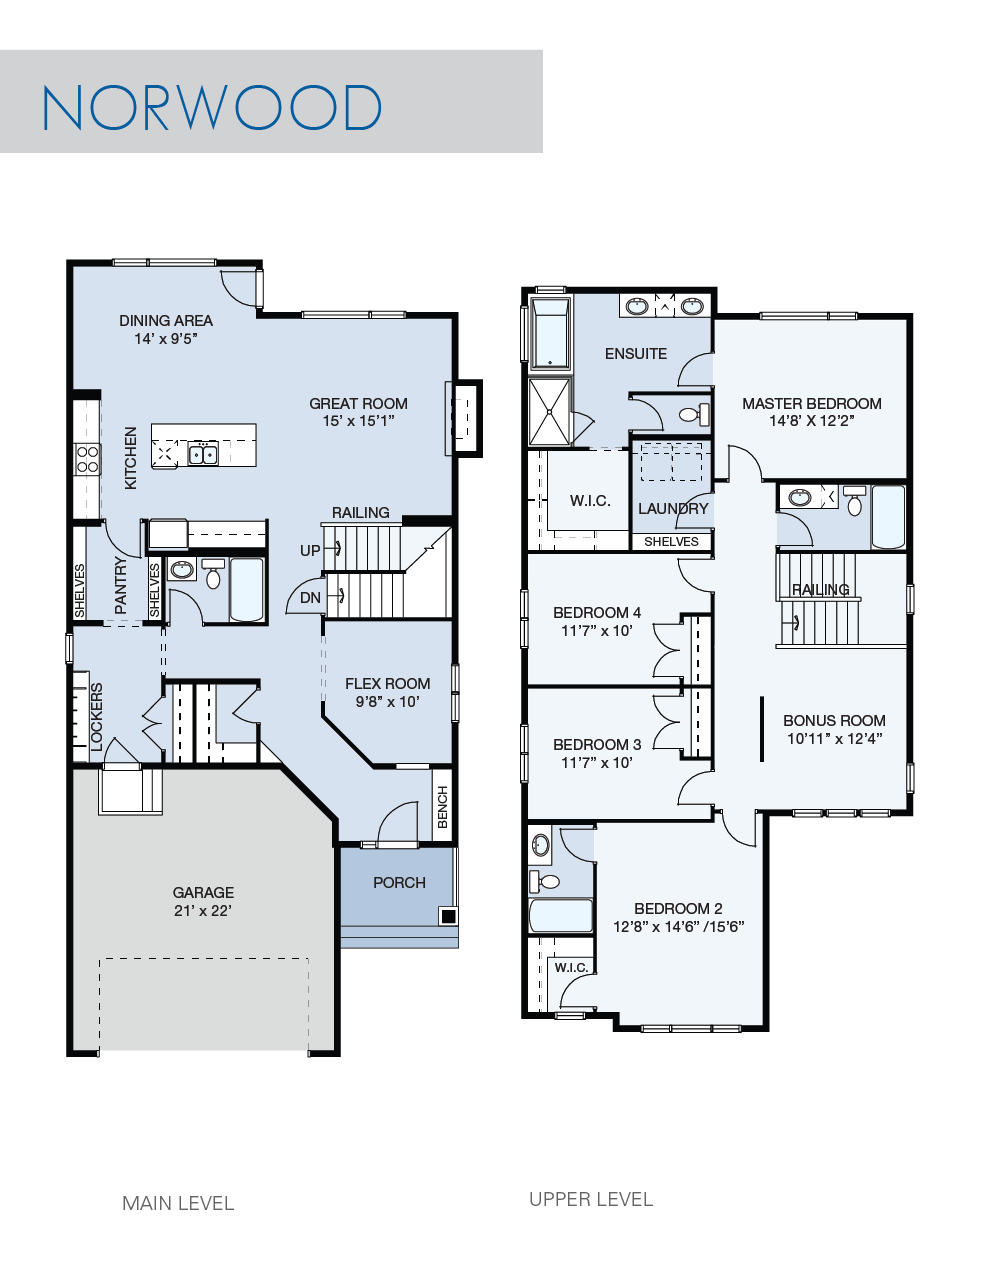 Norwood floor plan by NuVista Homes